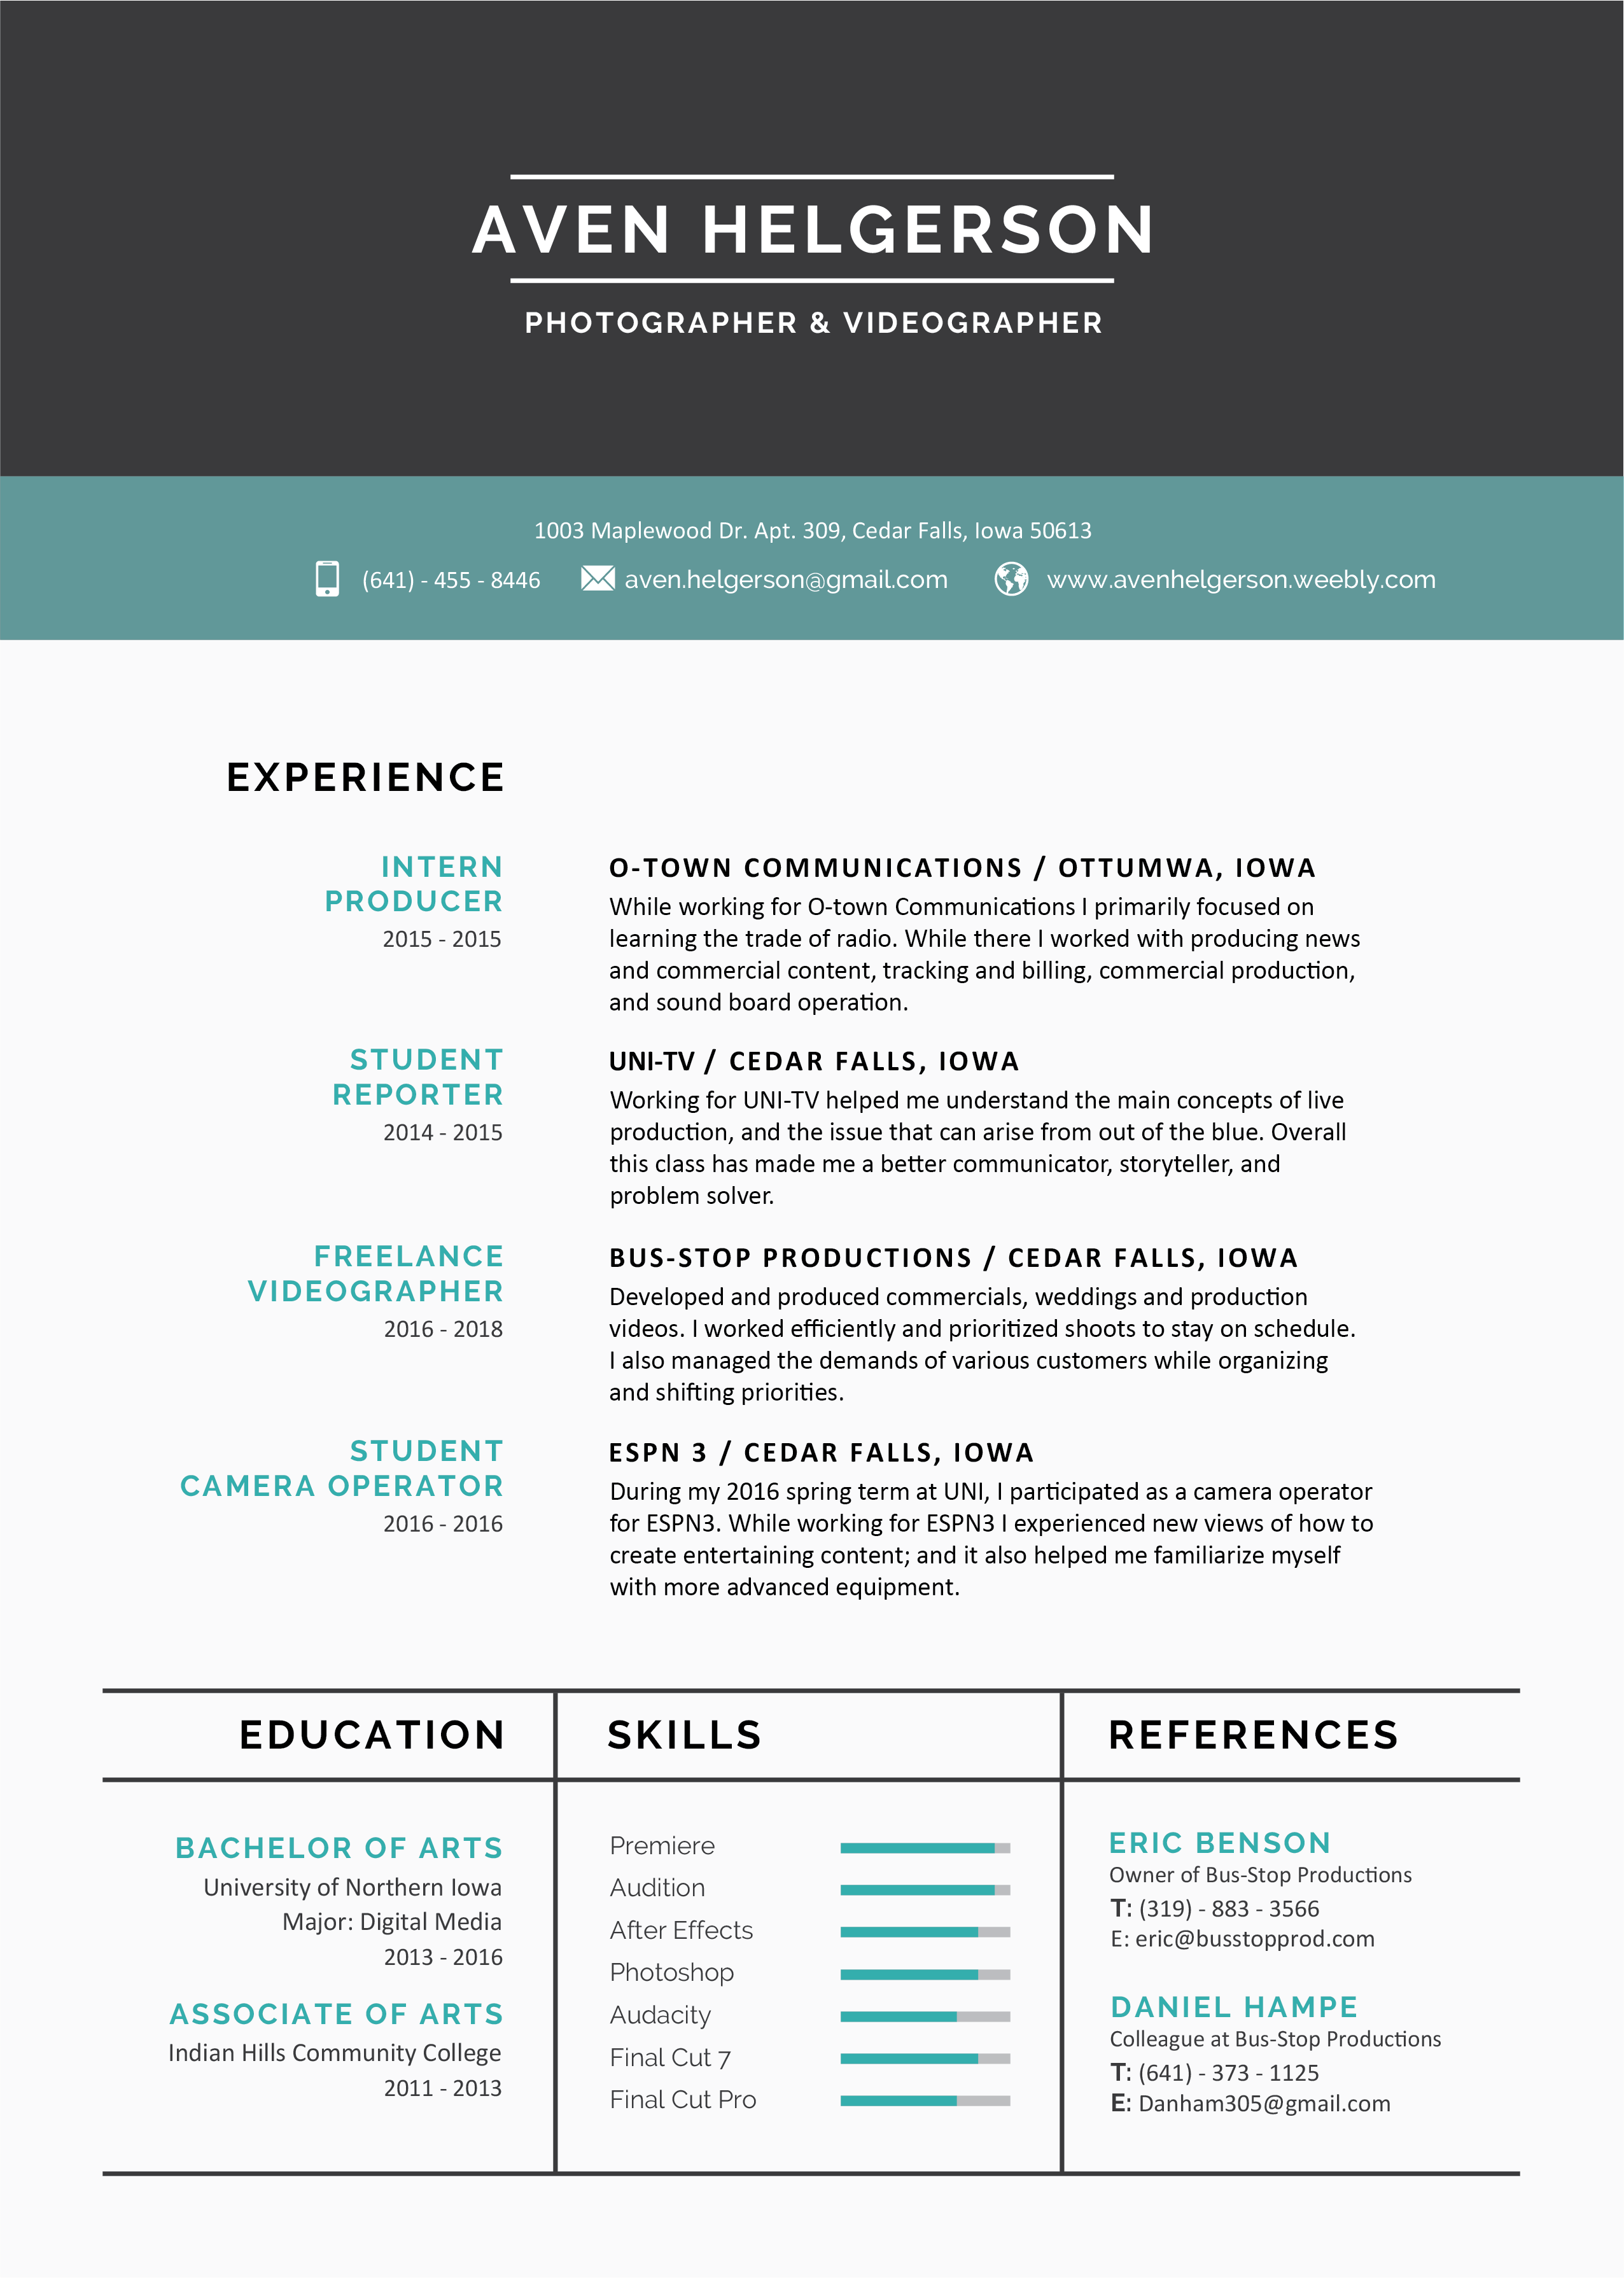 Contacts and Resume - AVEN HELGERSON